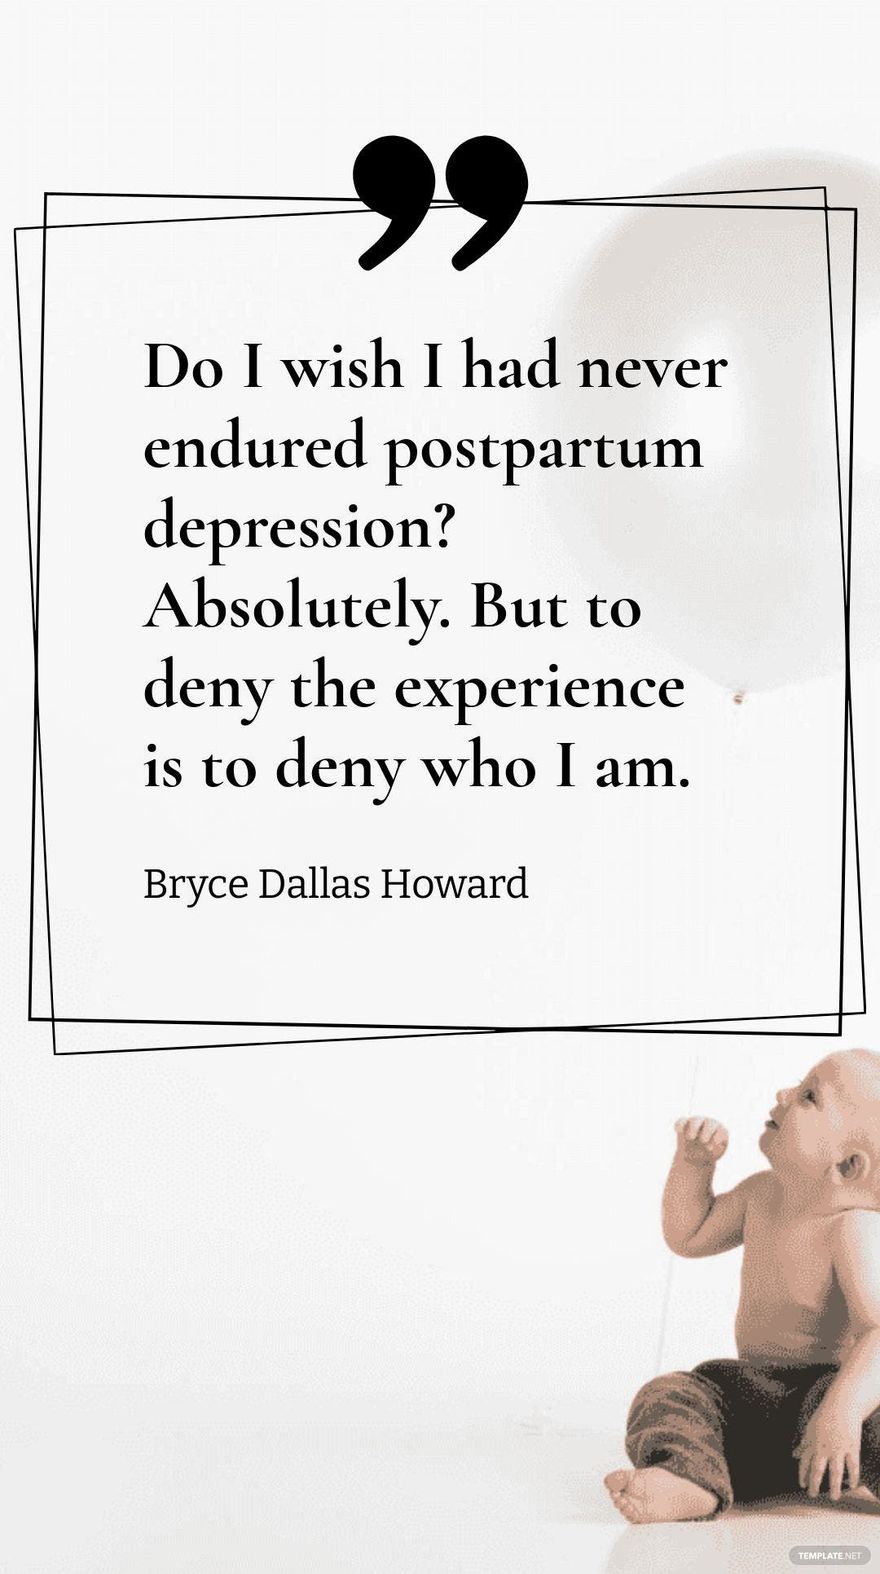 Bryce Dallas Howard - Do I wish I had never endured postpartum depression? Absolutely. But to deny the experience is to deny who I am.